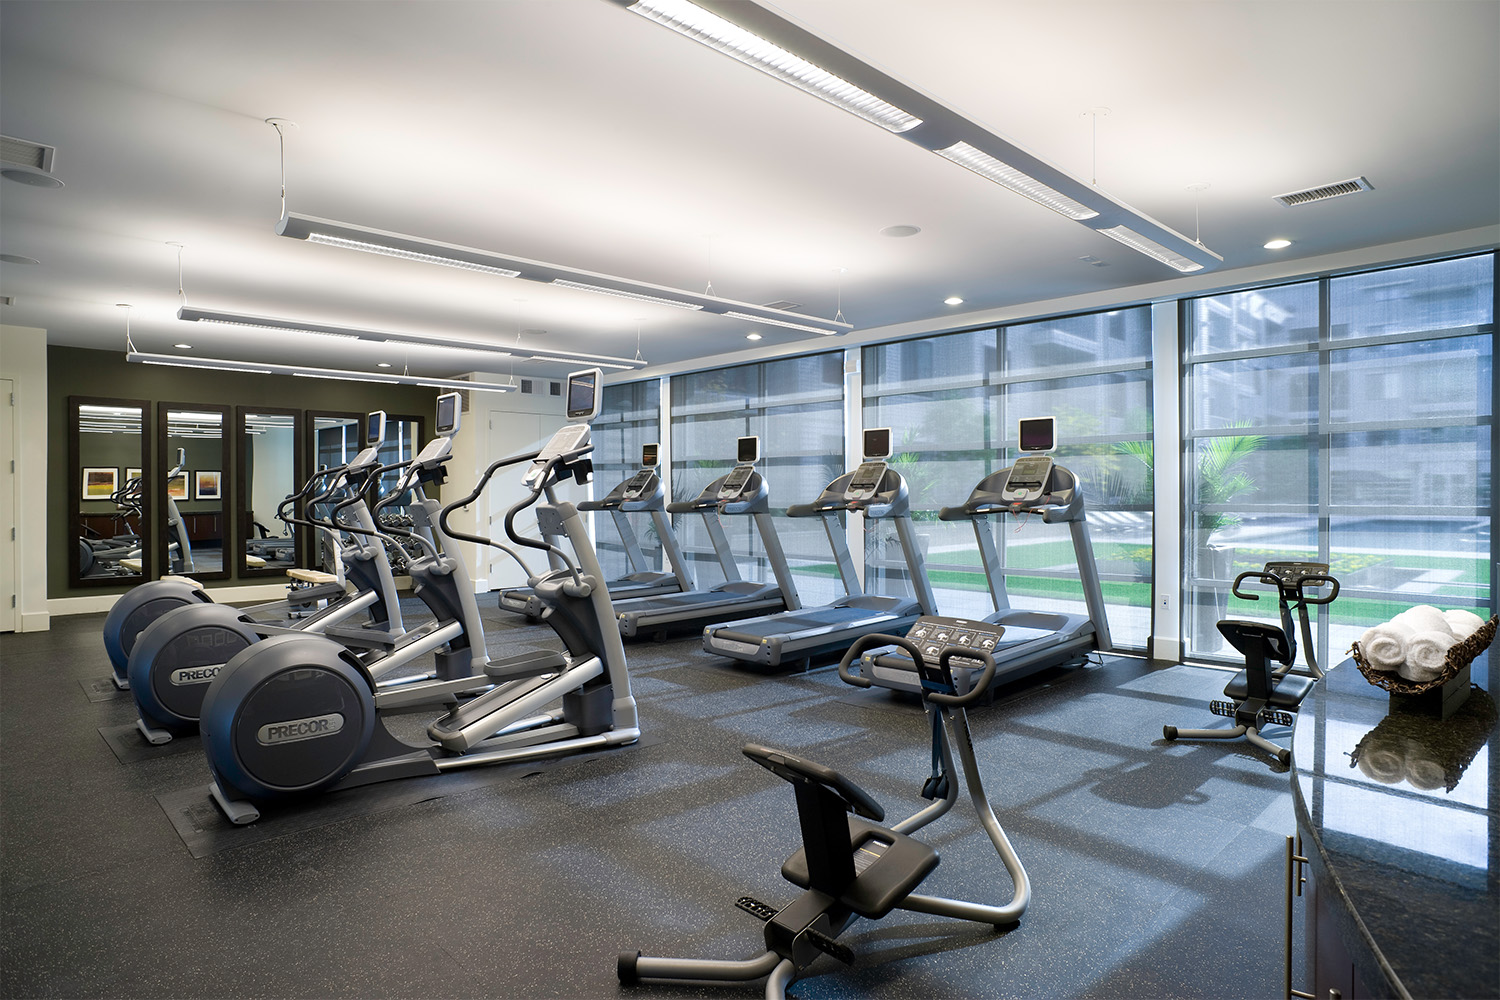 Gym with a row of treadmills and bikes facing central courtyard